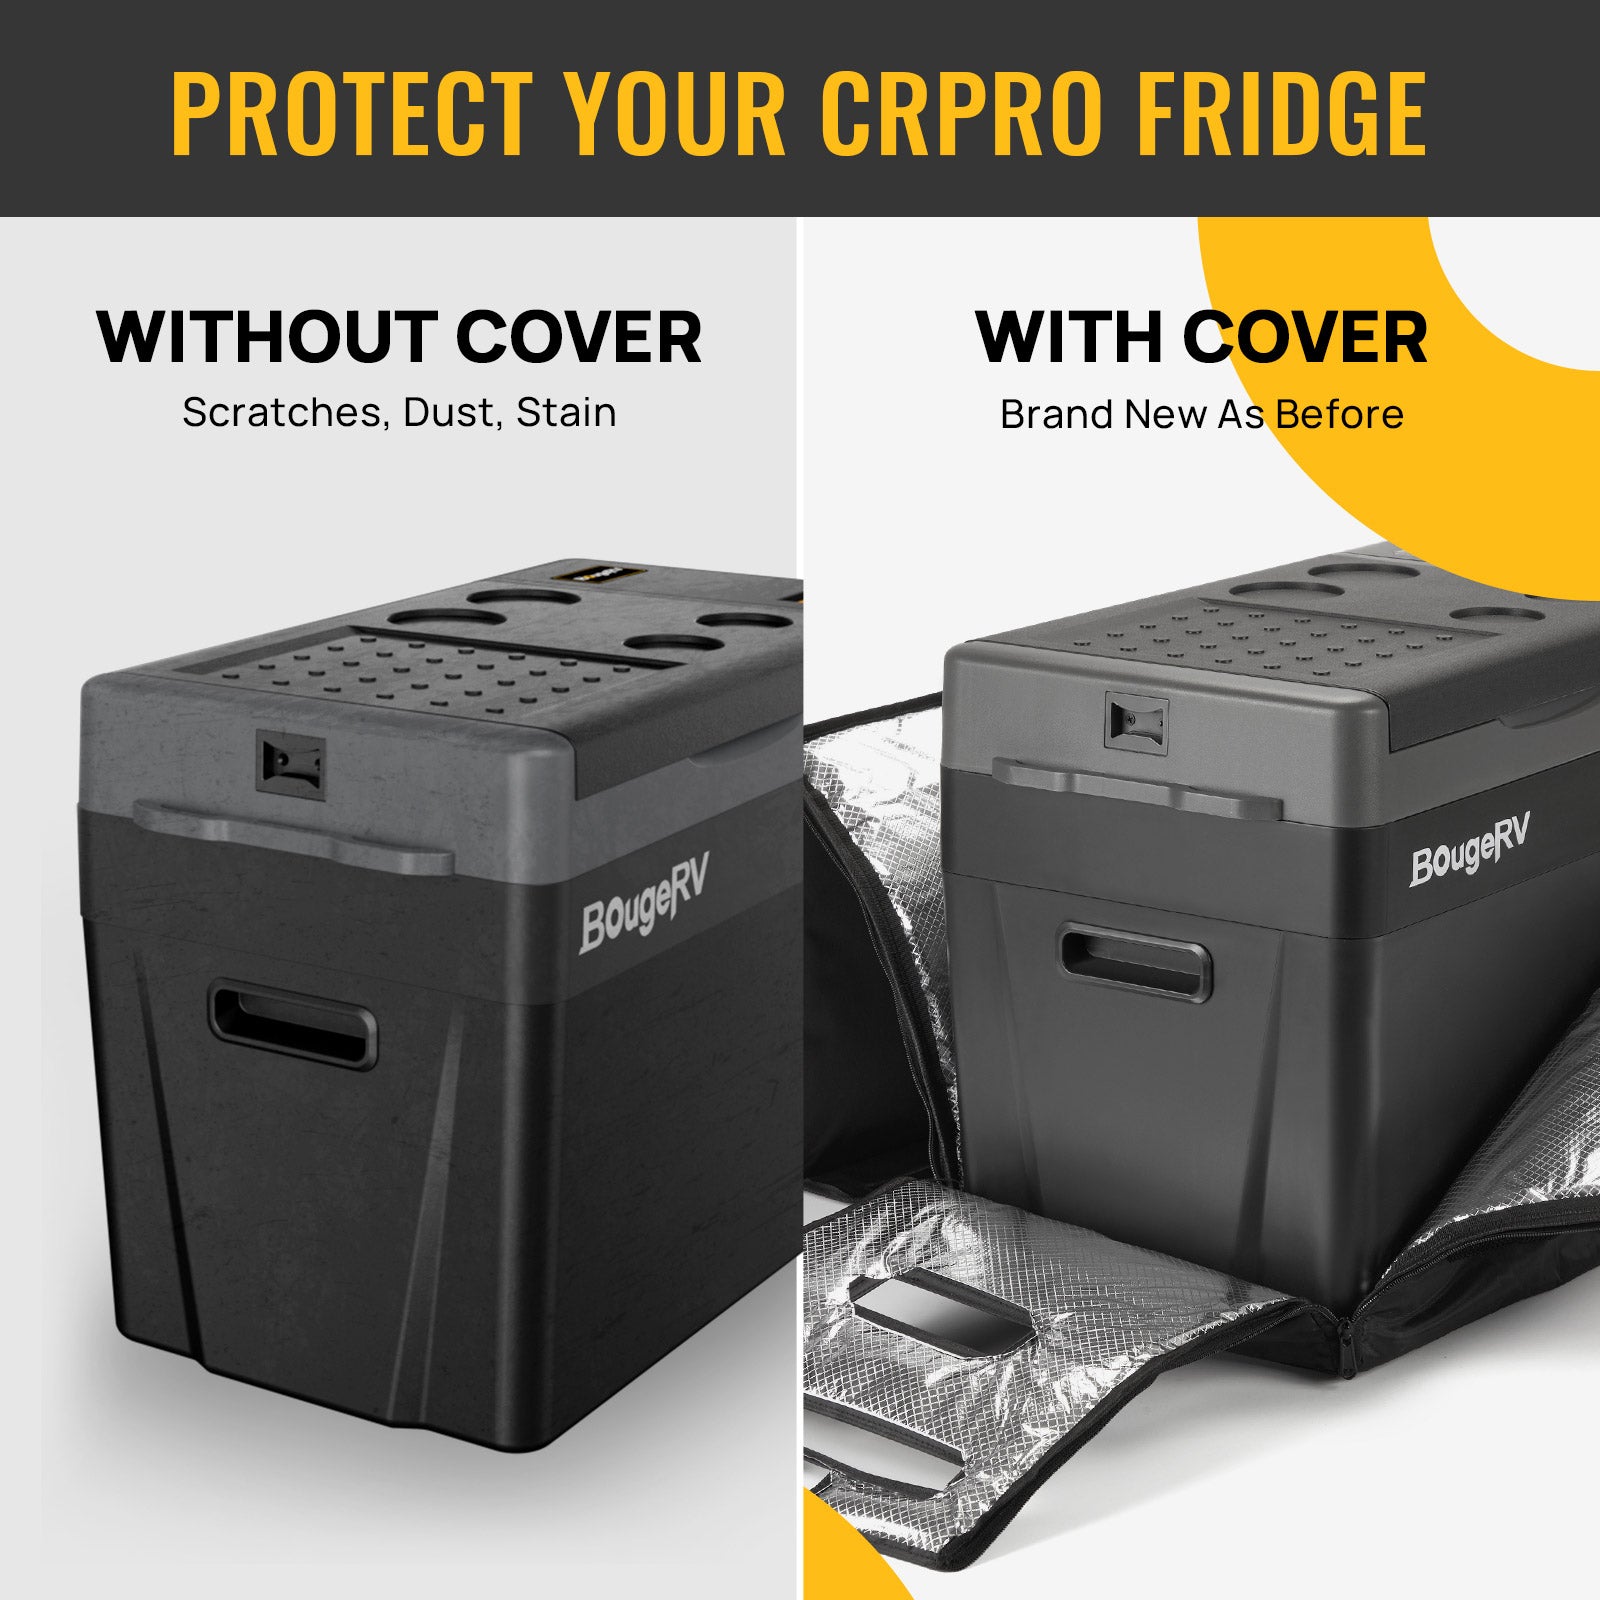 CRPRO30 30 Quart Refrigerator Insulated Protective Cover